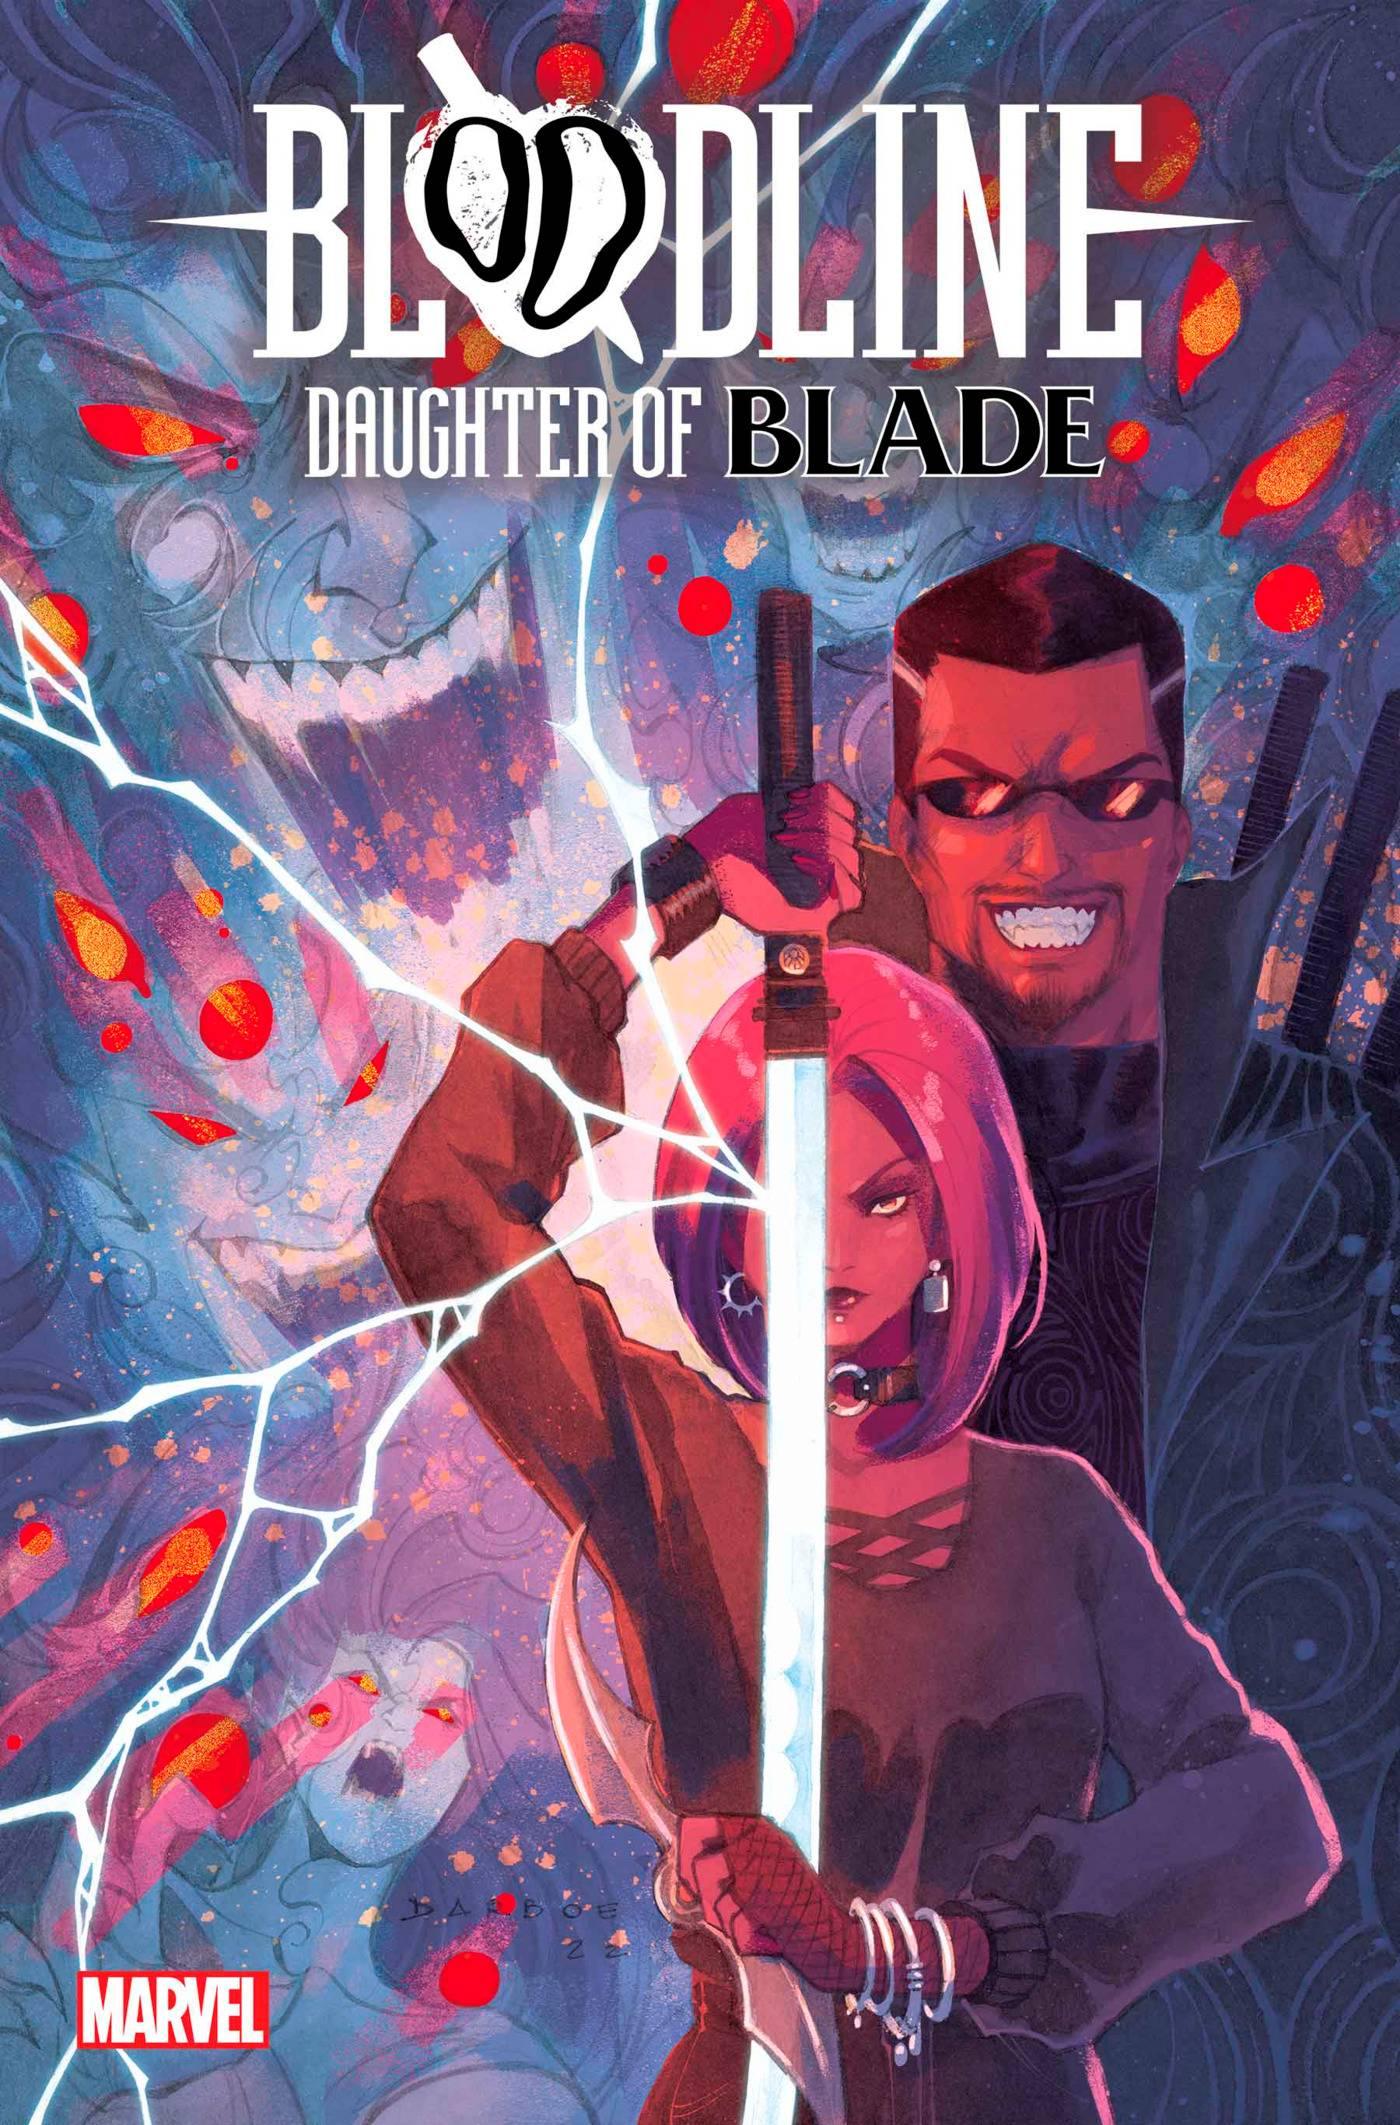 BLOODLINE DAUGHTER OF BLADE #1 - HolyGrail Comix